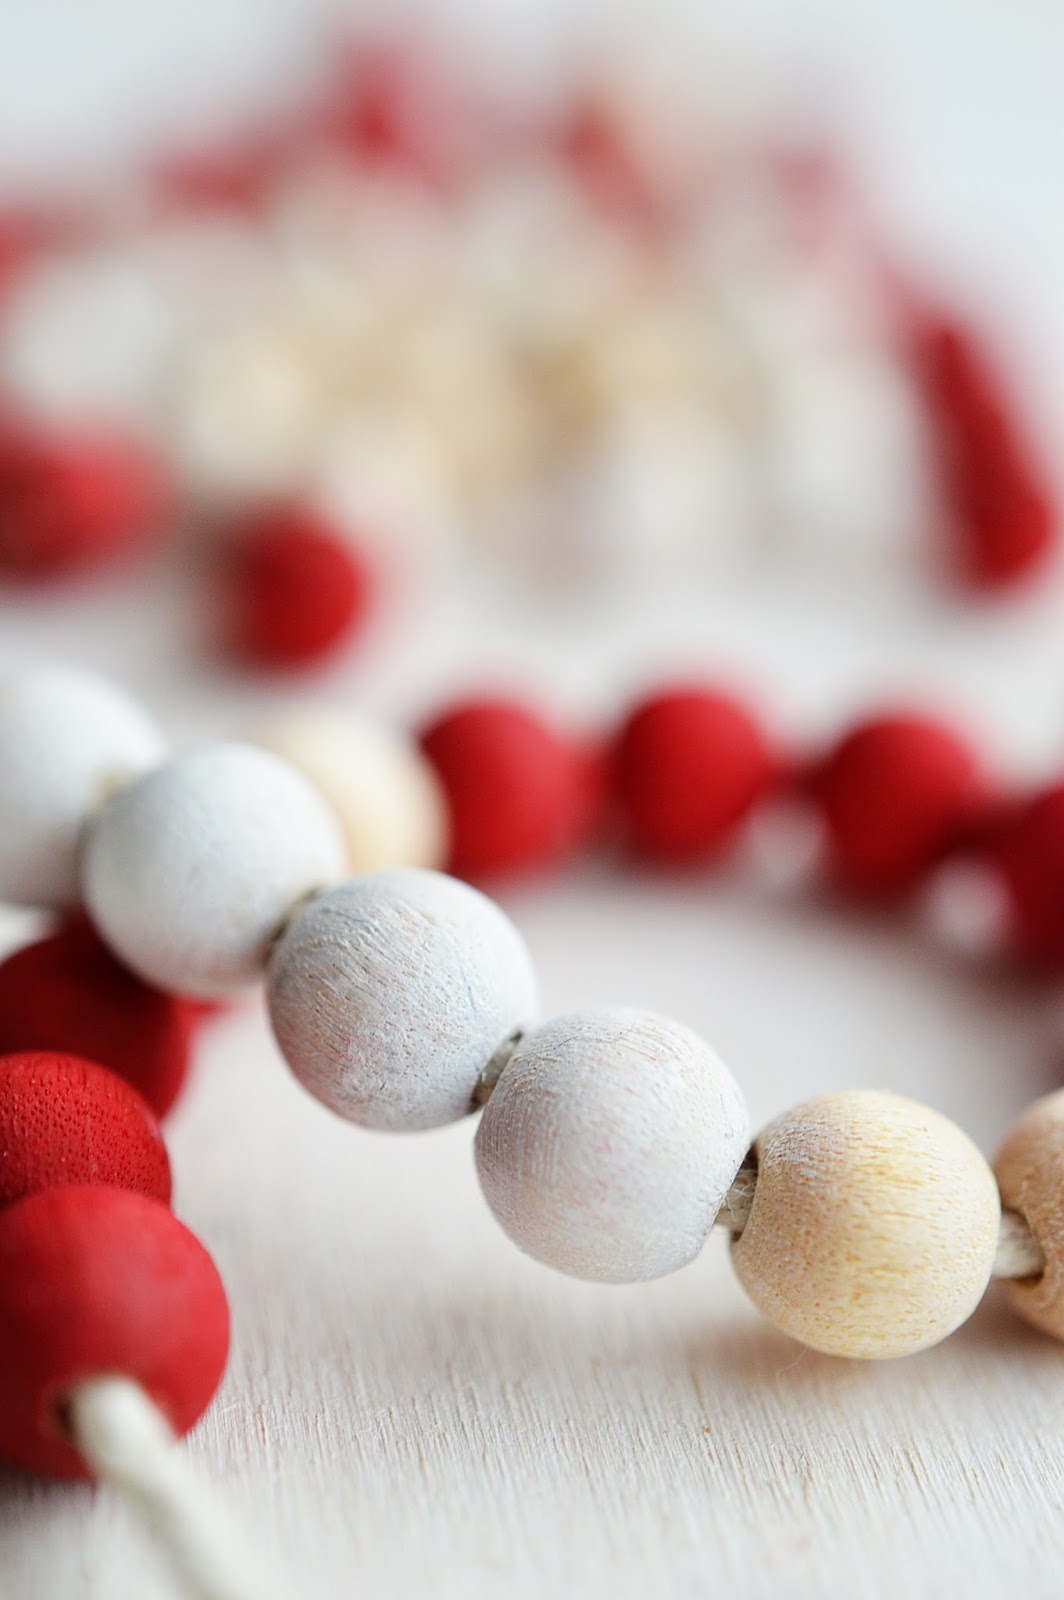 How to Paint Wooden Beads | Motte's Blog